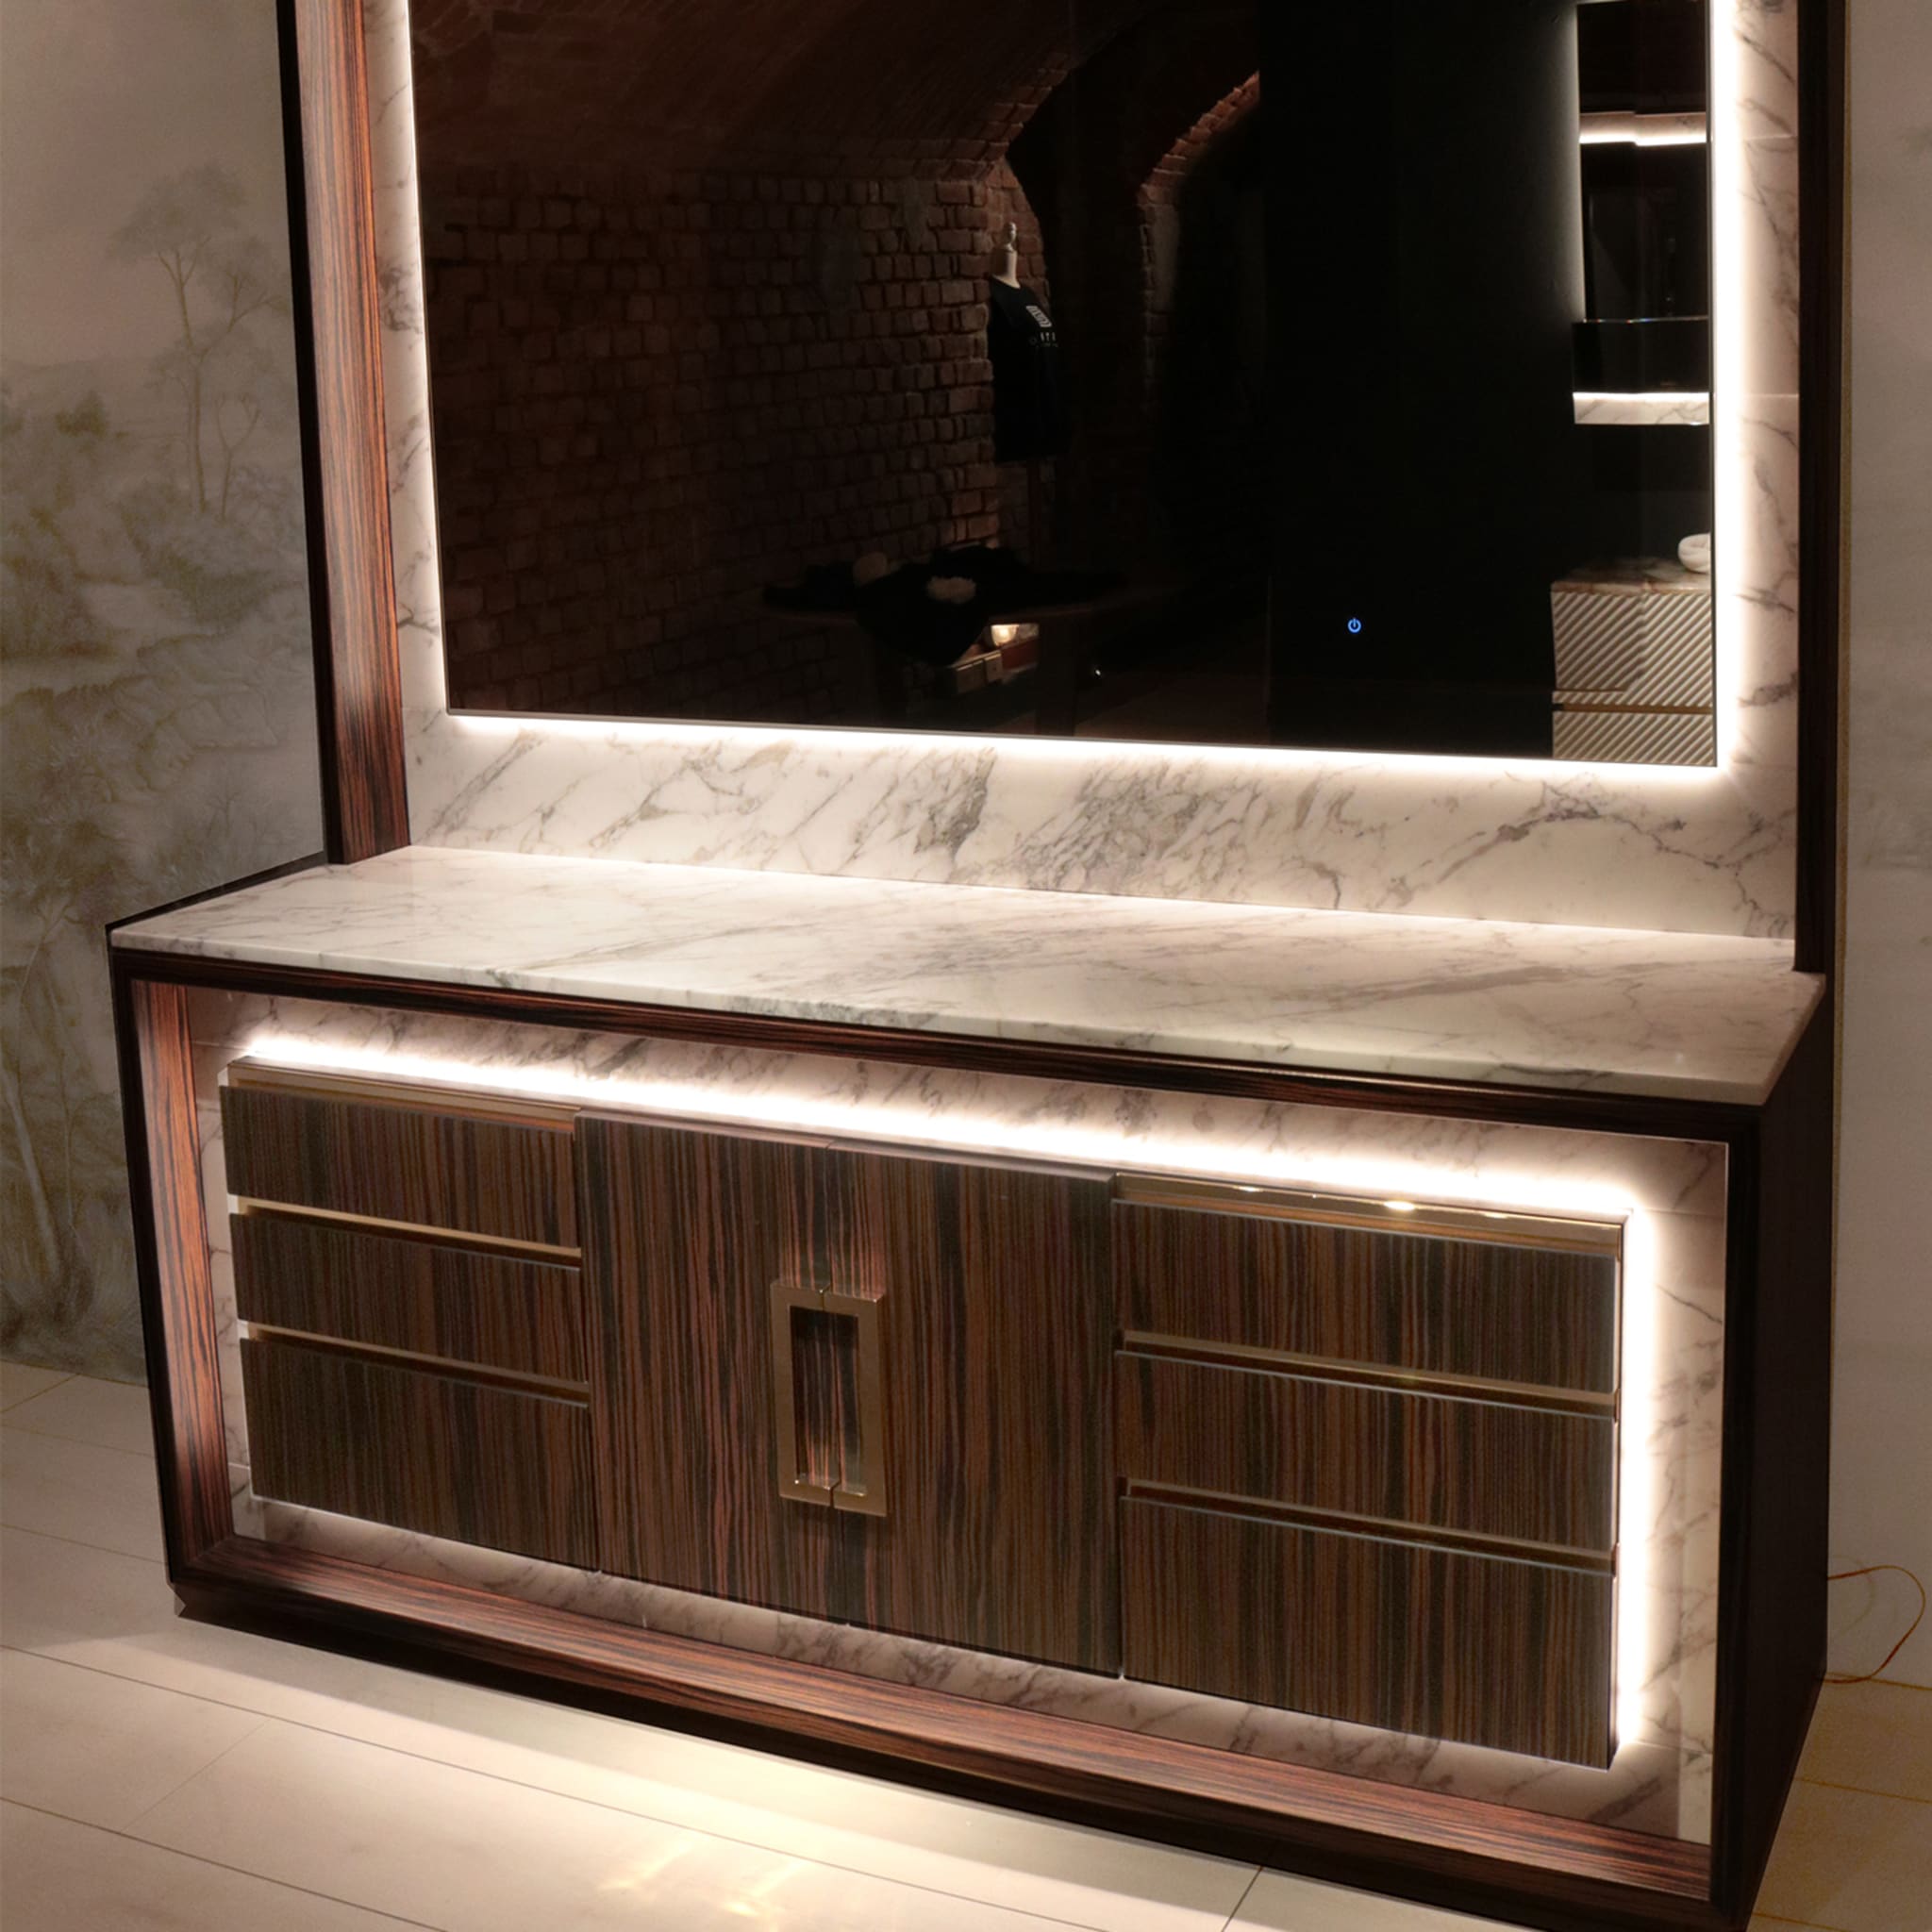 Frame LF Arabescato sideboard with mirror - Alternative view 1